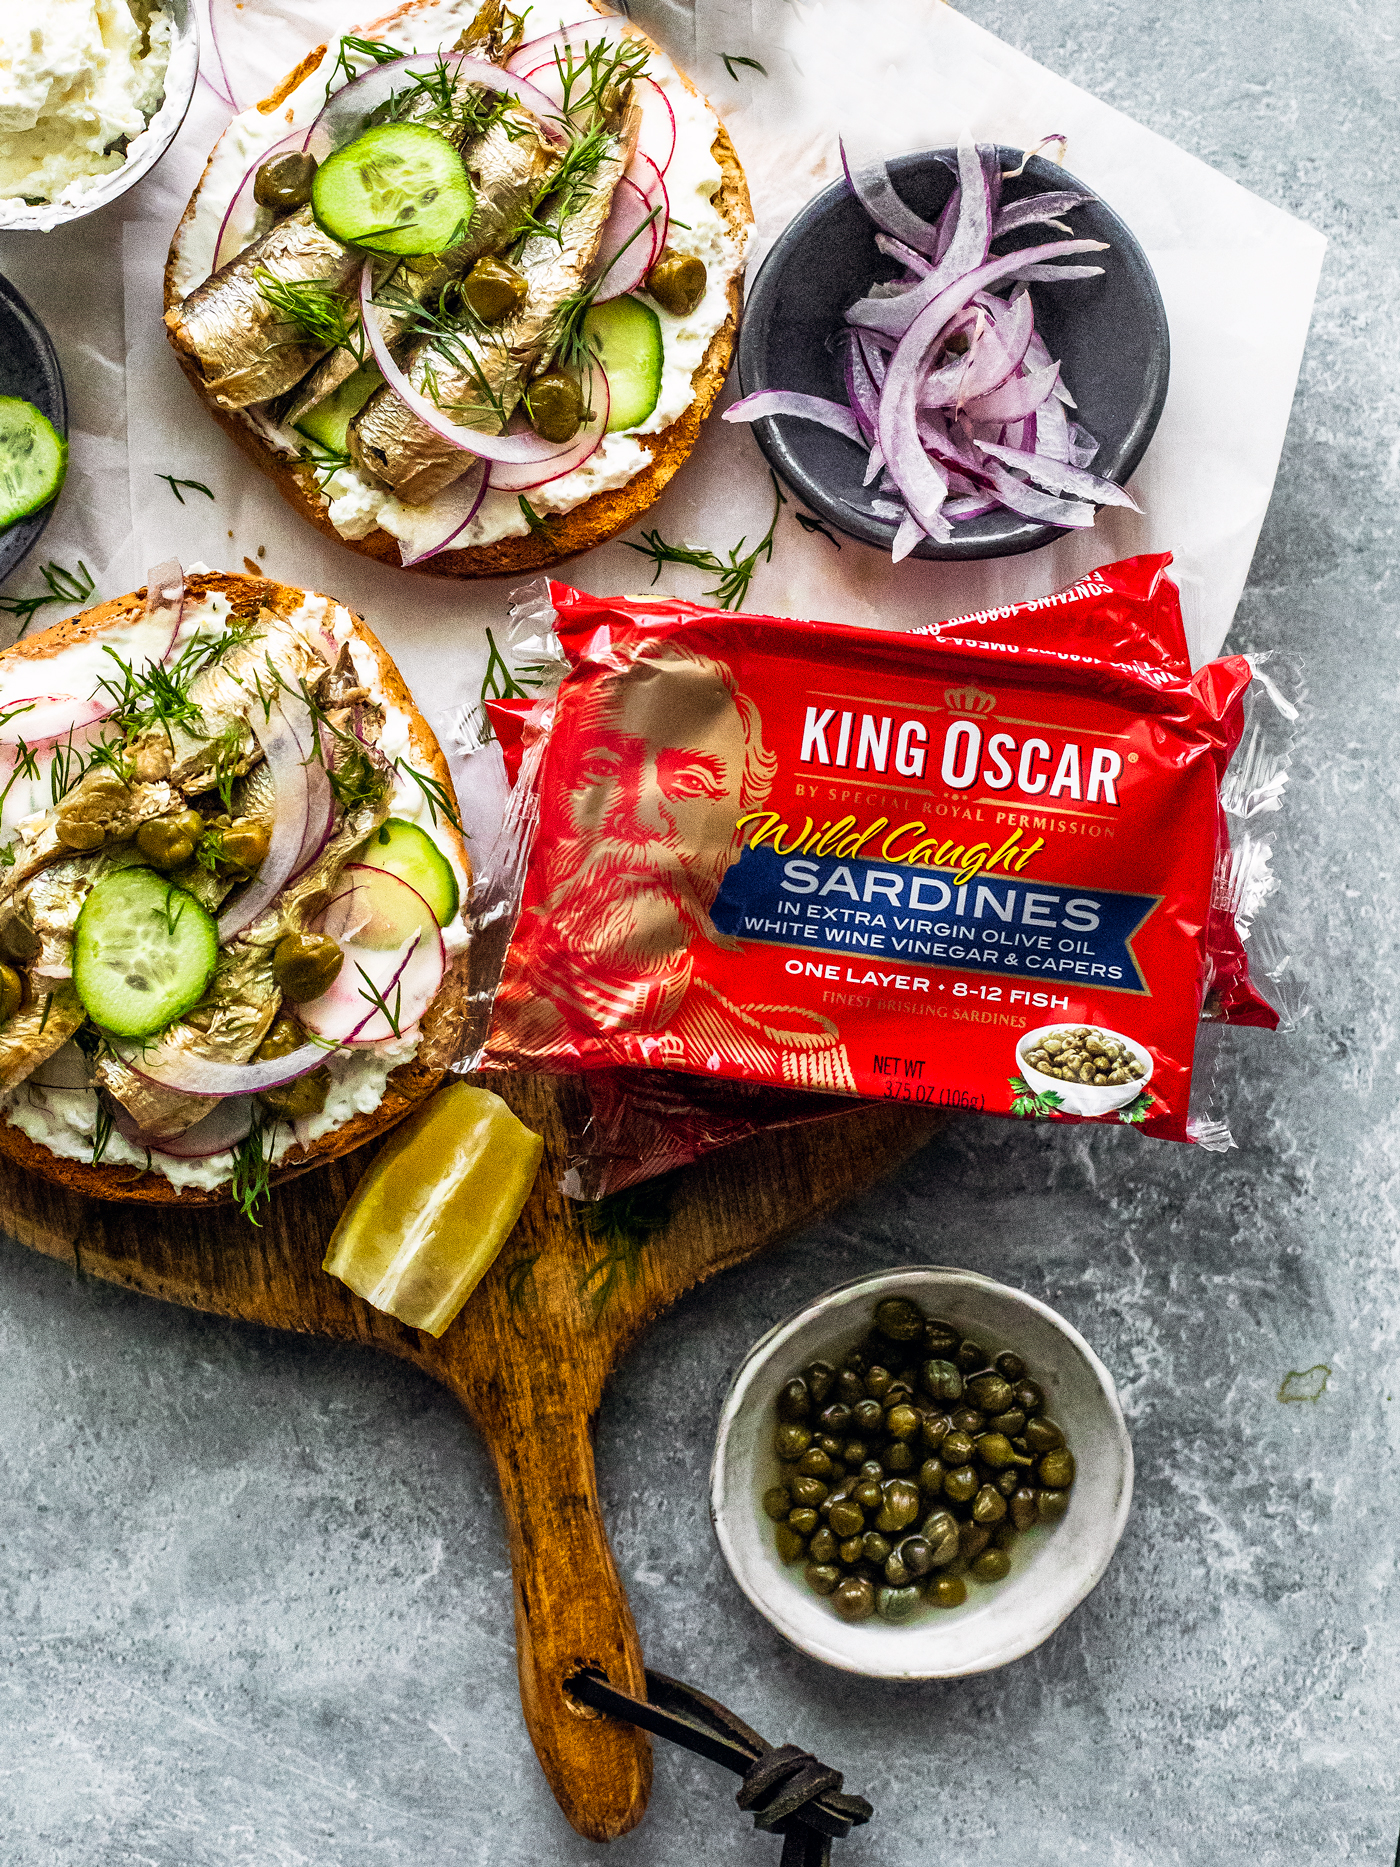 Package of King Oscar sardines with bagels on serving board.